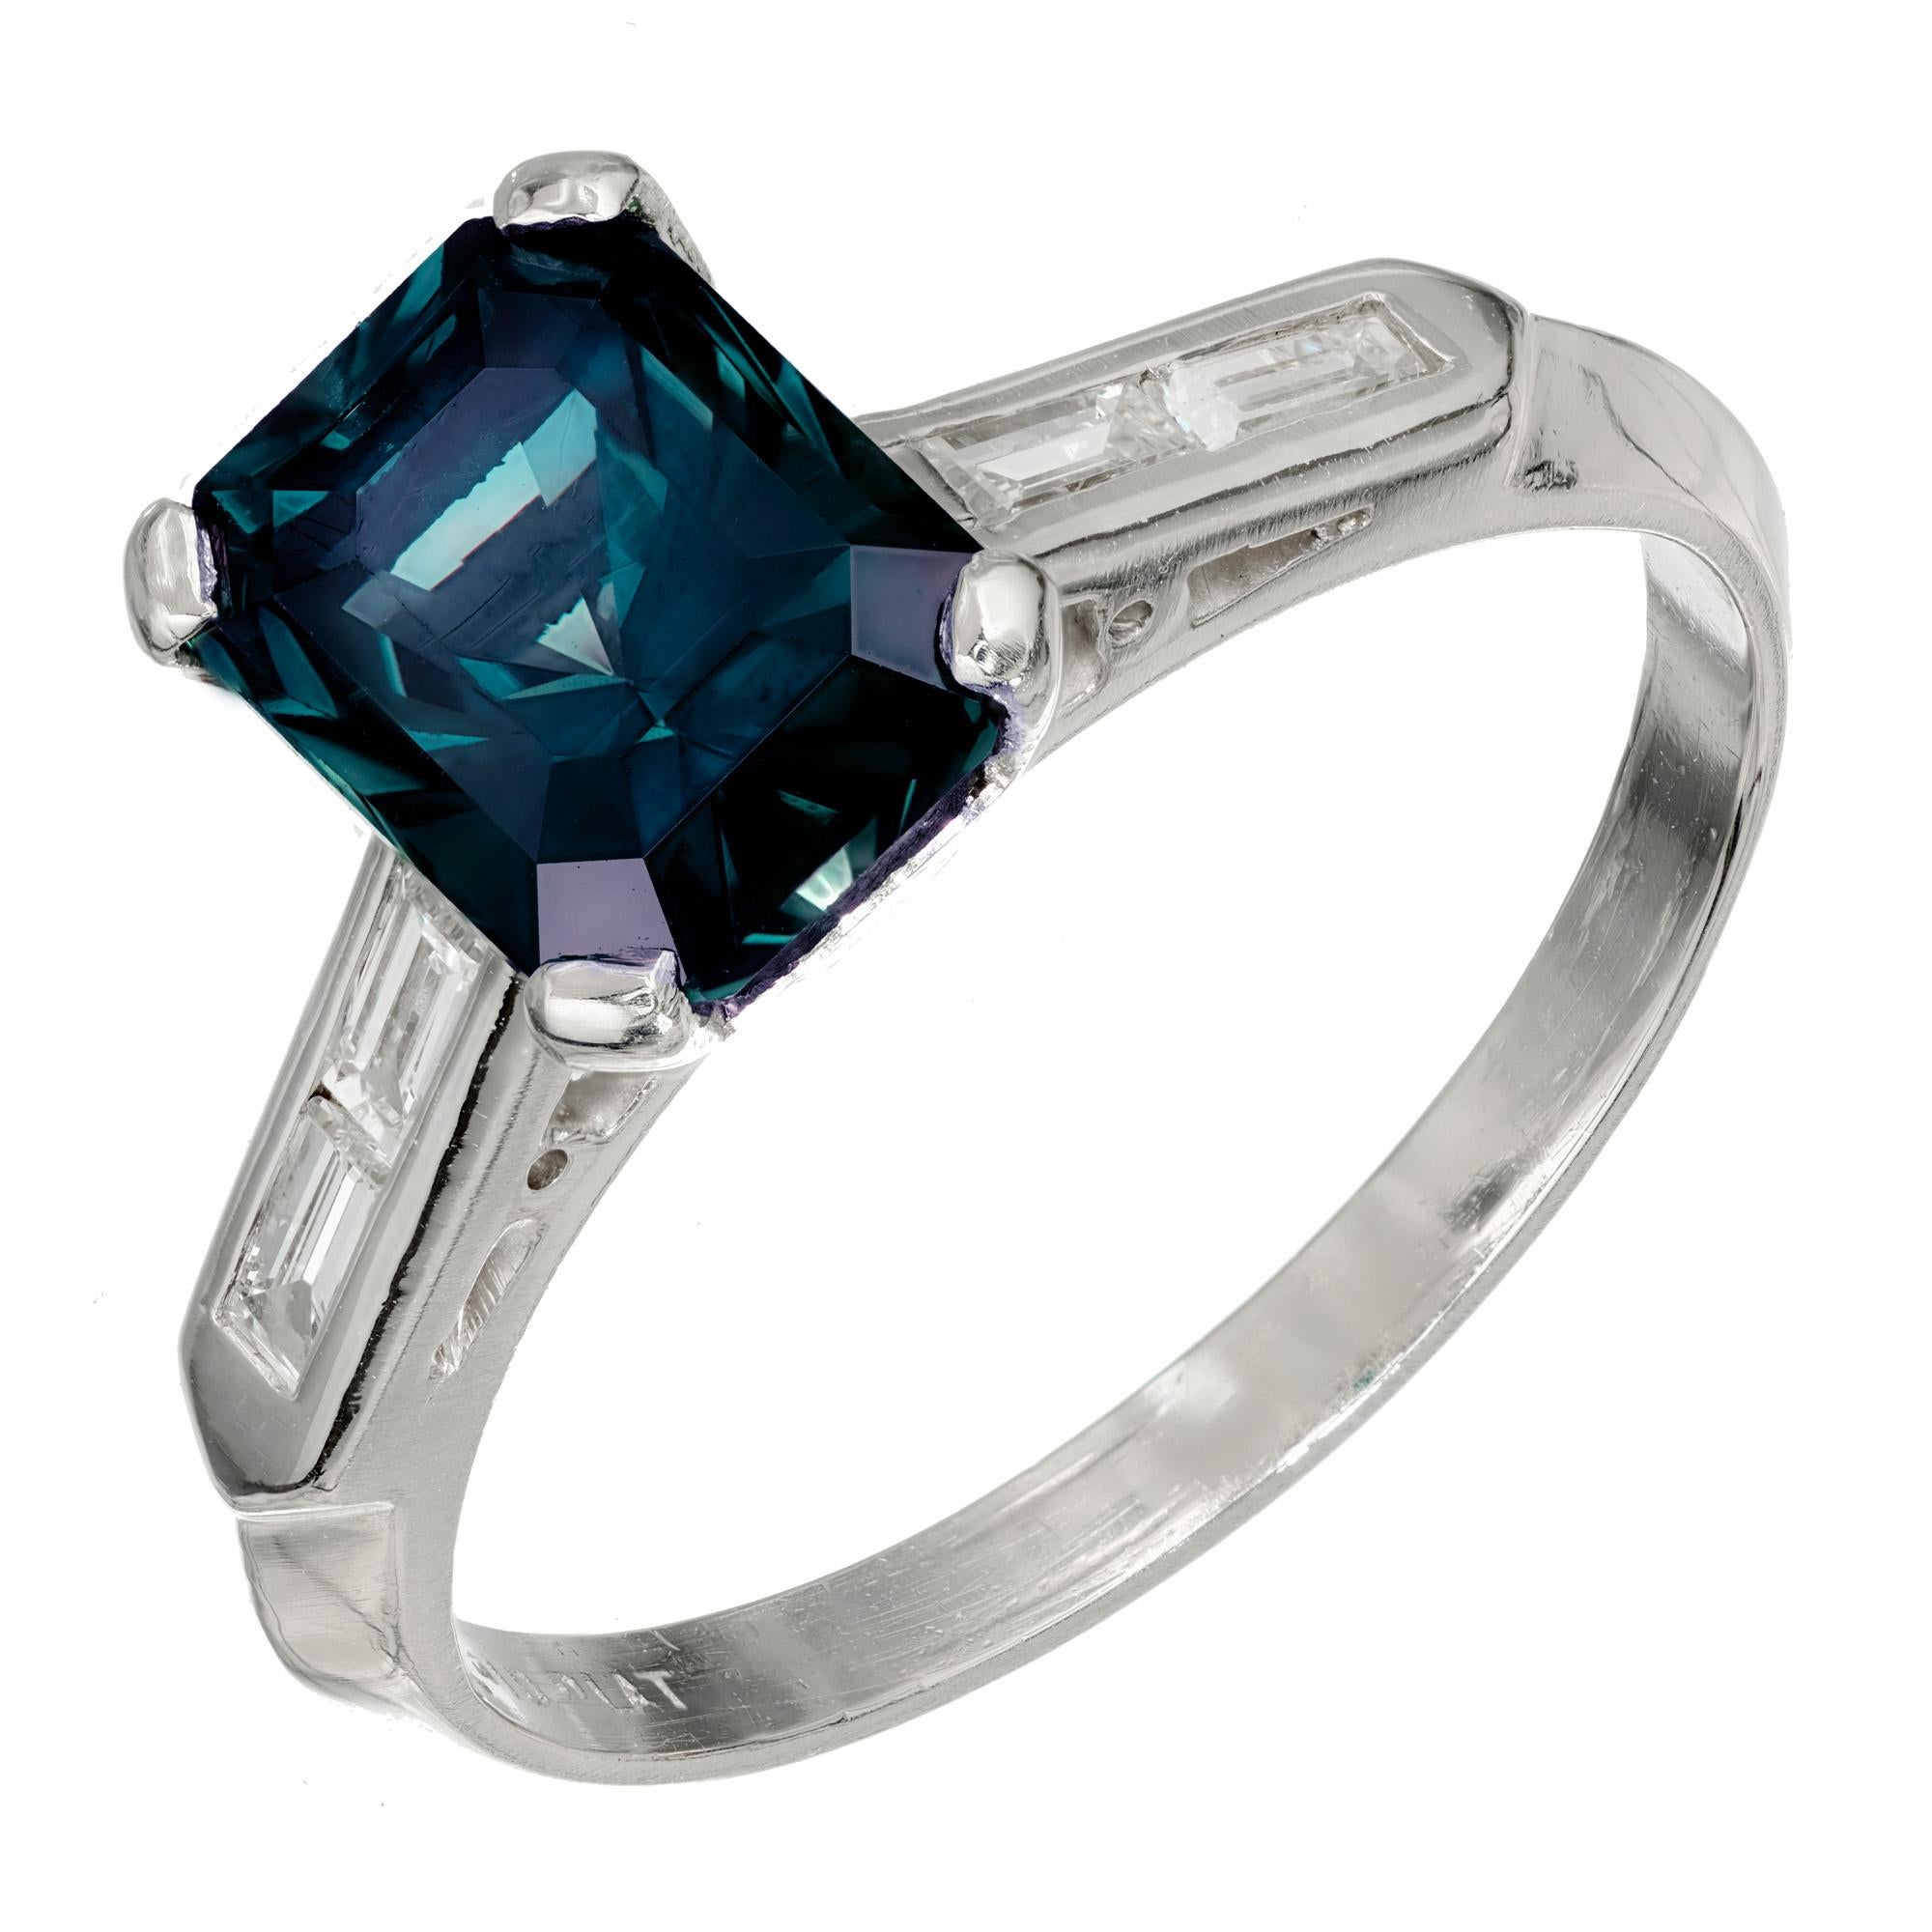 Green Sapphire and diamond engagement ring. Octagonal green sapphire center stone in a platinum setting with four baguette accent diamonds.  The ring is designed to show off the rich natural, untreated greenish blue color of the sapphire. Crafted in